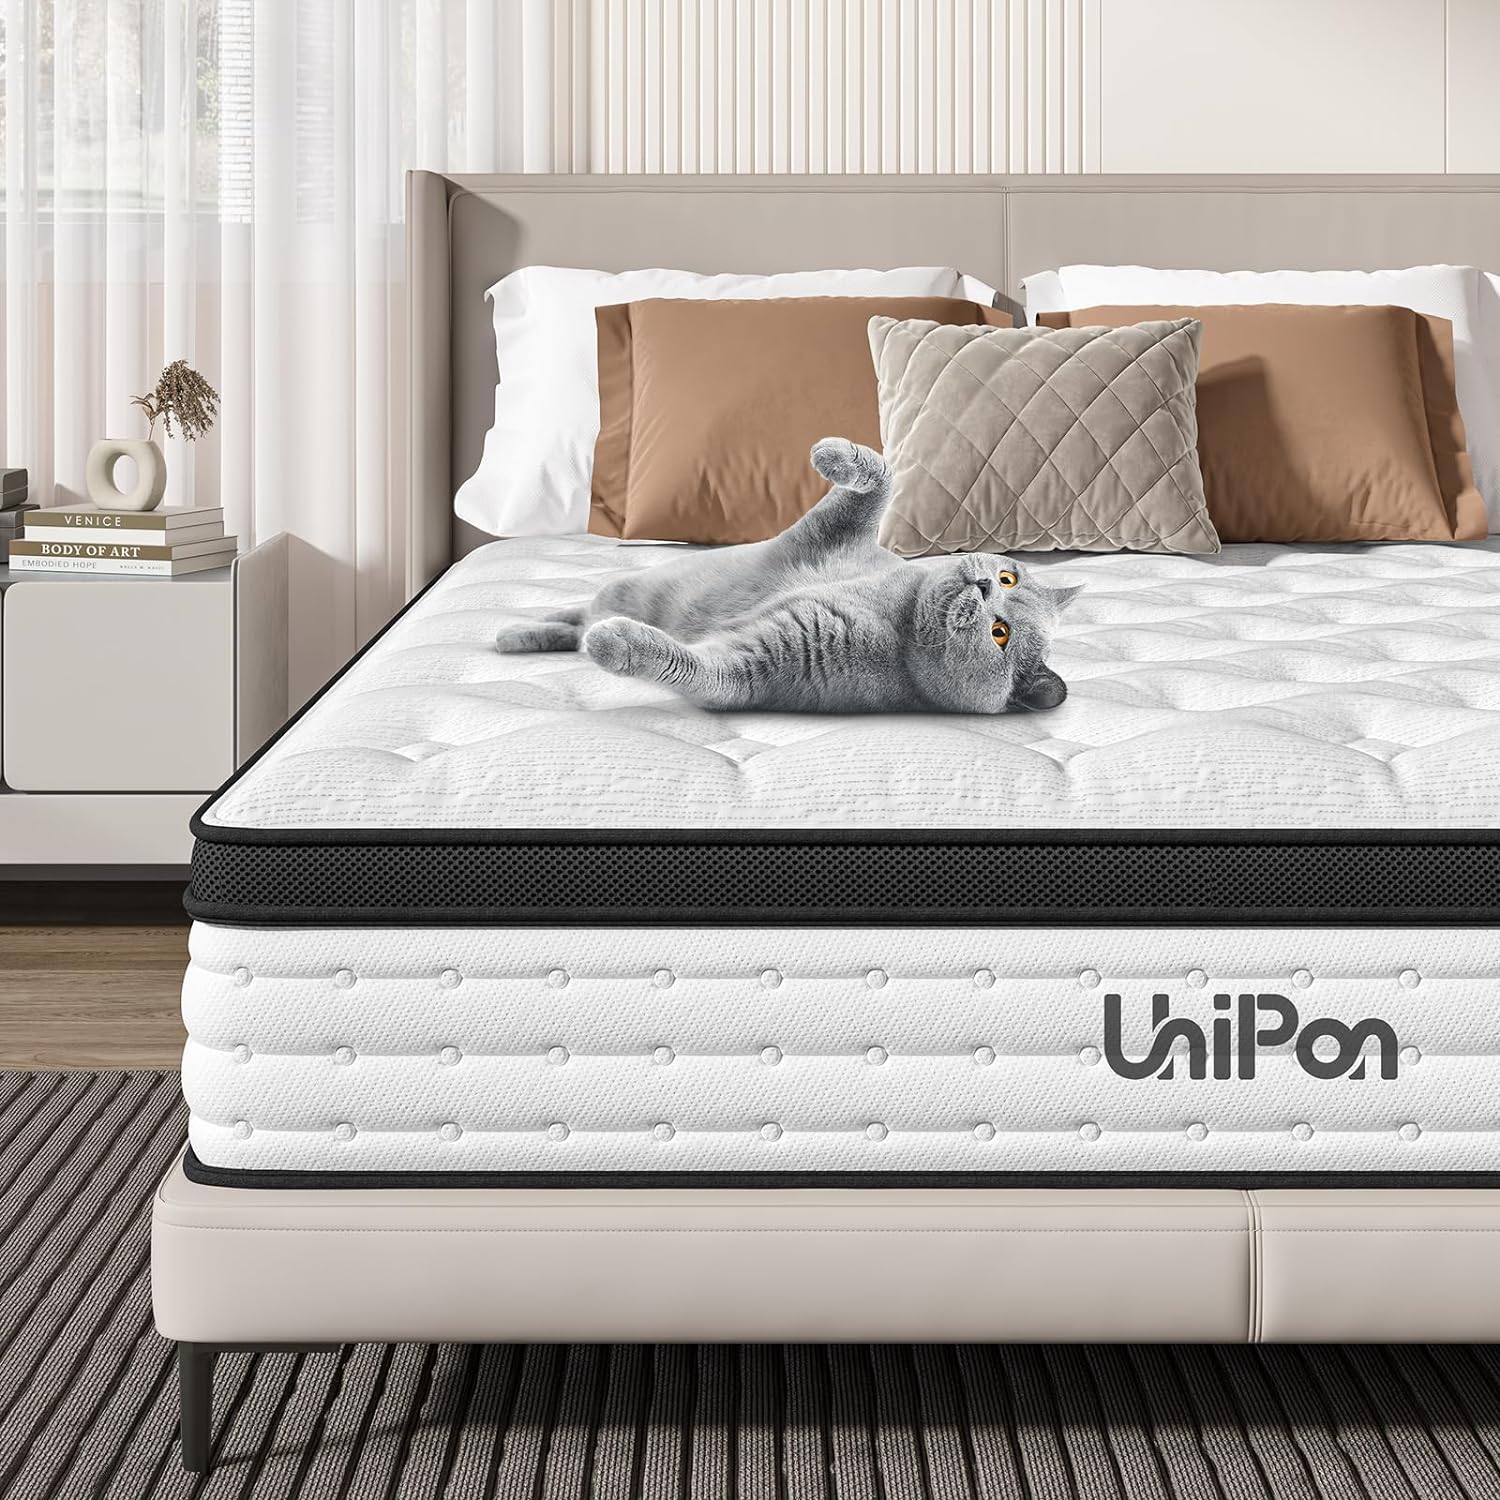 UniPon 10 Inch Hybrid Mattress Queen, Spring Mattress with Gel Memory Foam, Medium Firm Mattress, Made in USA, Supportive Individually Pocket Spring Mattress, Bed in a Box, Pressure Relief